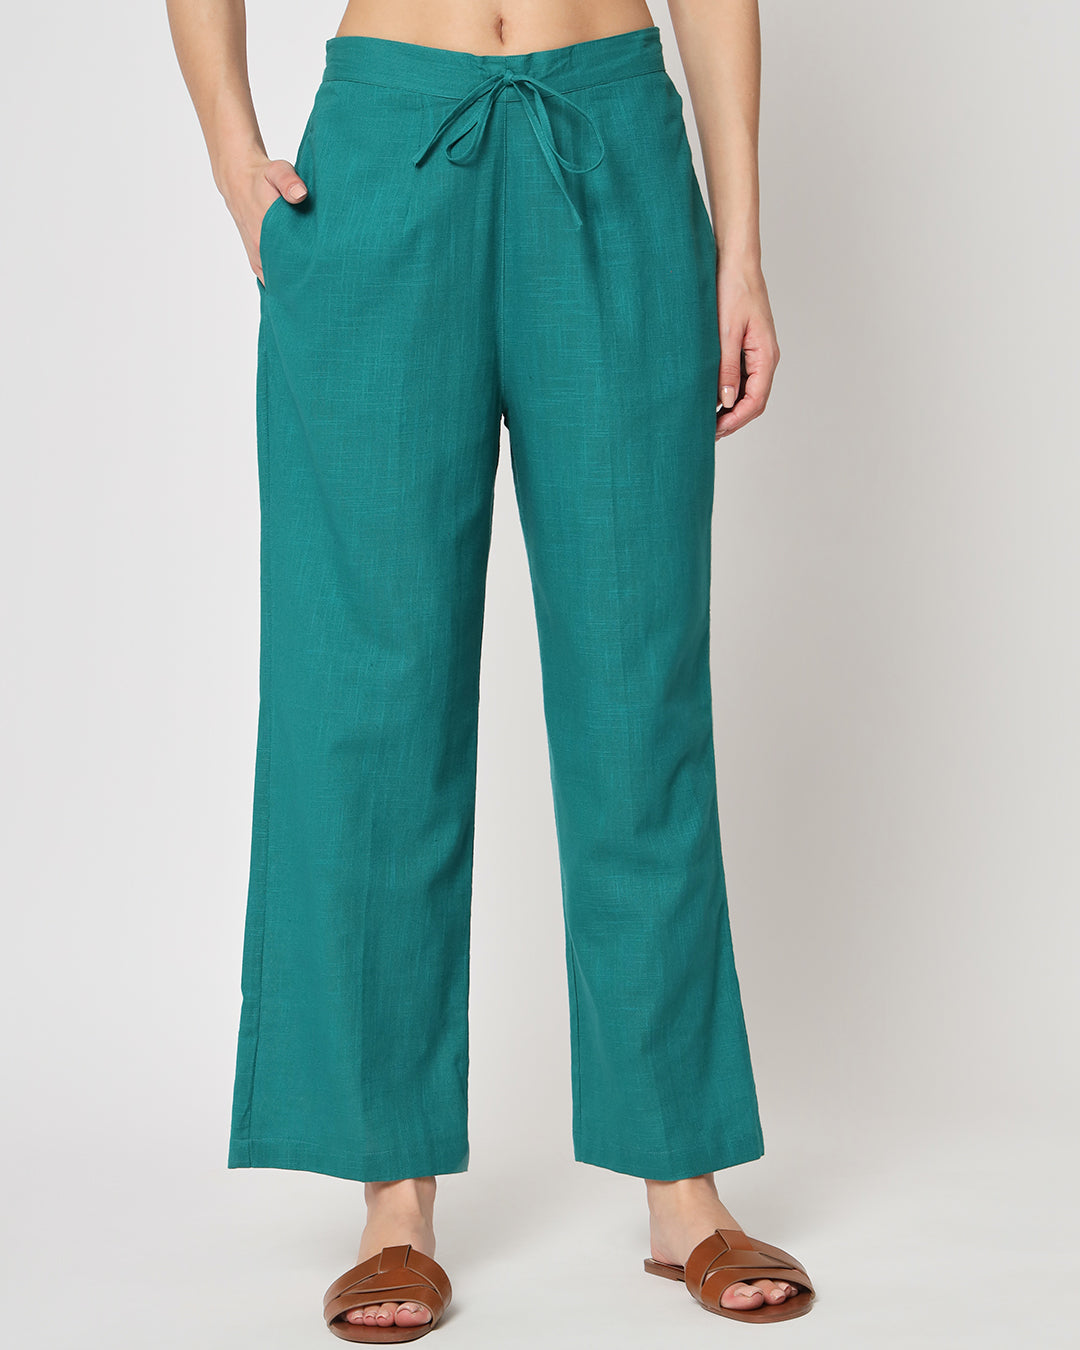 Combo: Airy Lemon & Forest Green Straight Pants- Set of 2